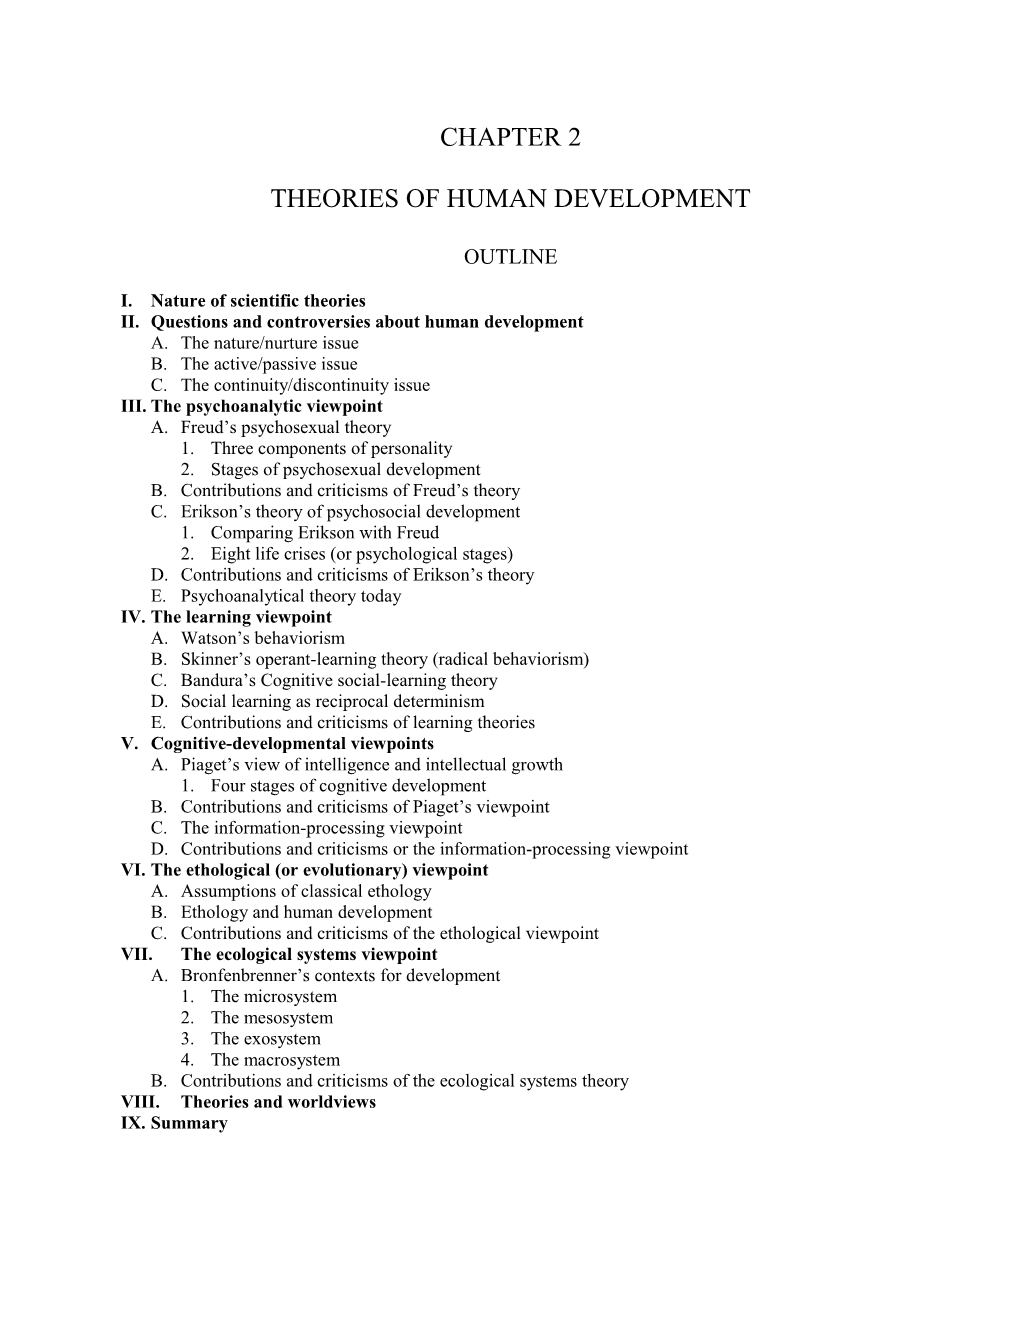 II. Questions and Controversies About Human Development